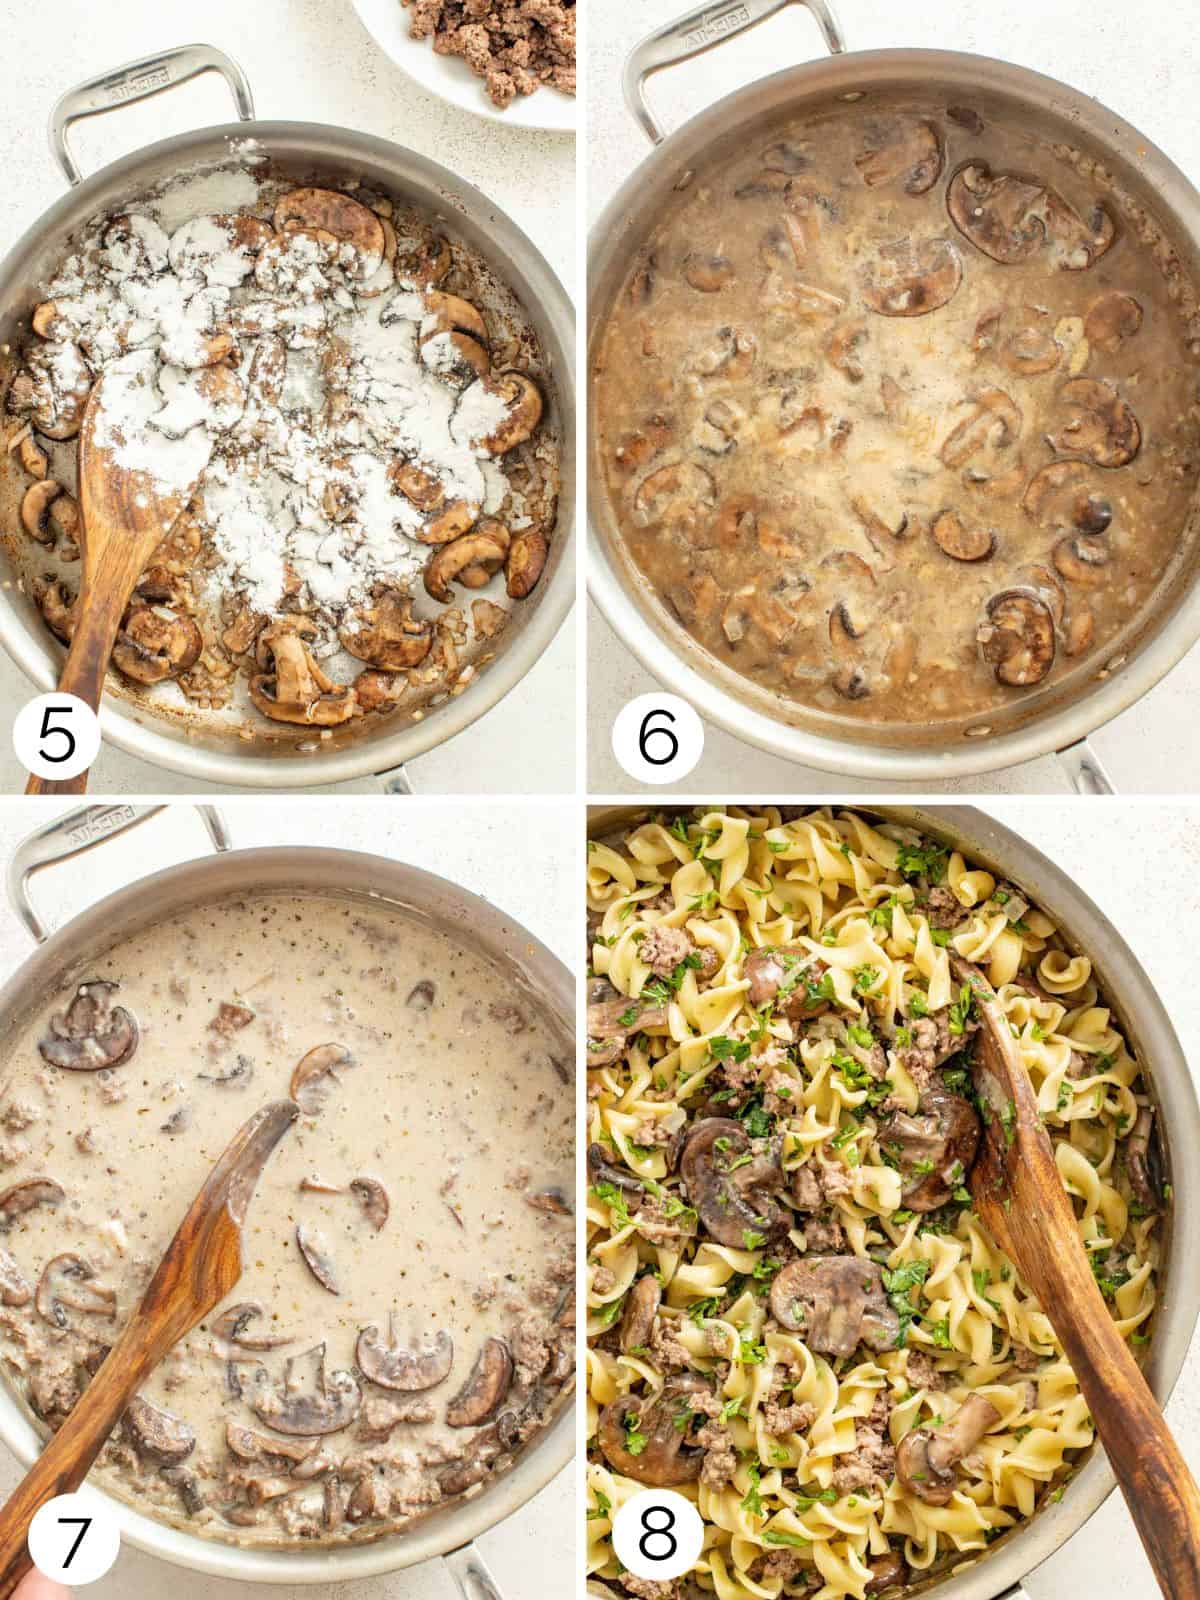 Process photos of making the stroganoff sauce by adding milk, broth, and flour to a stainless steel pan.